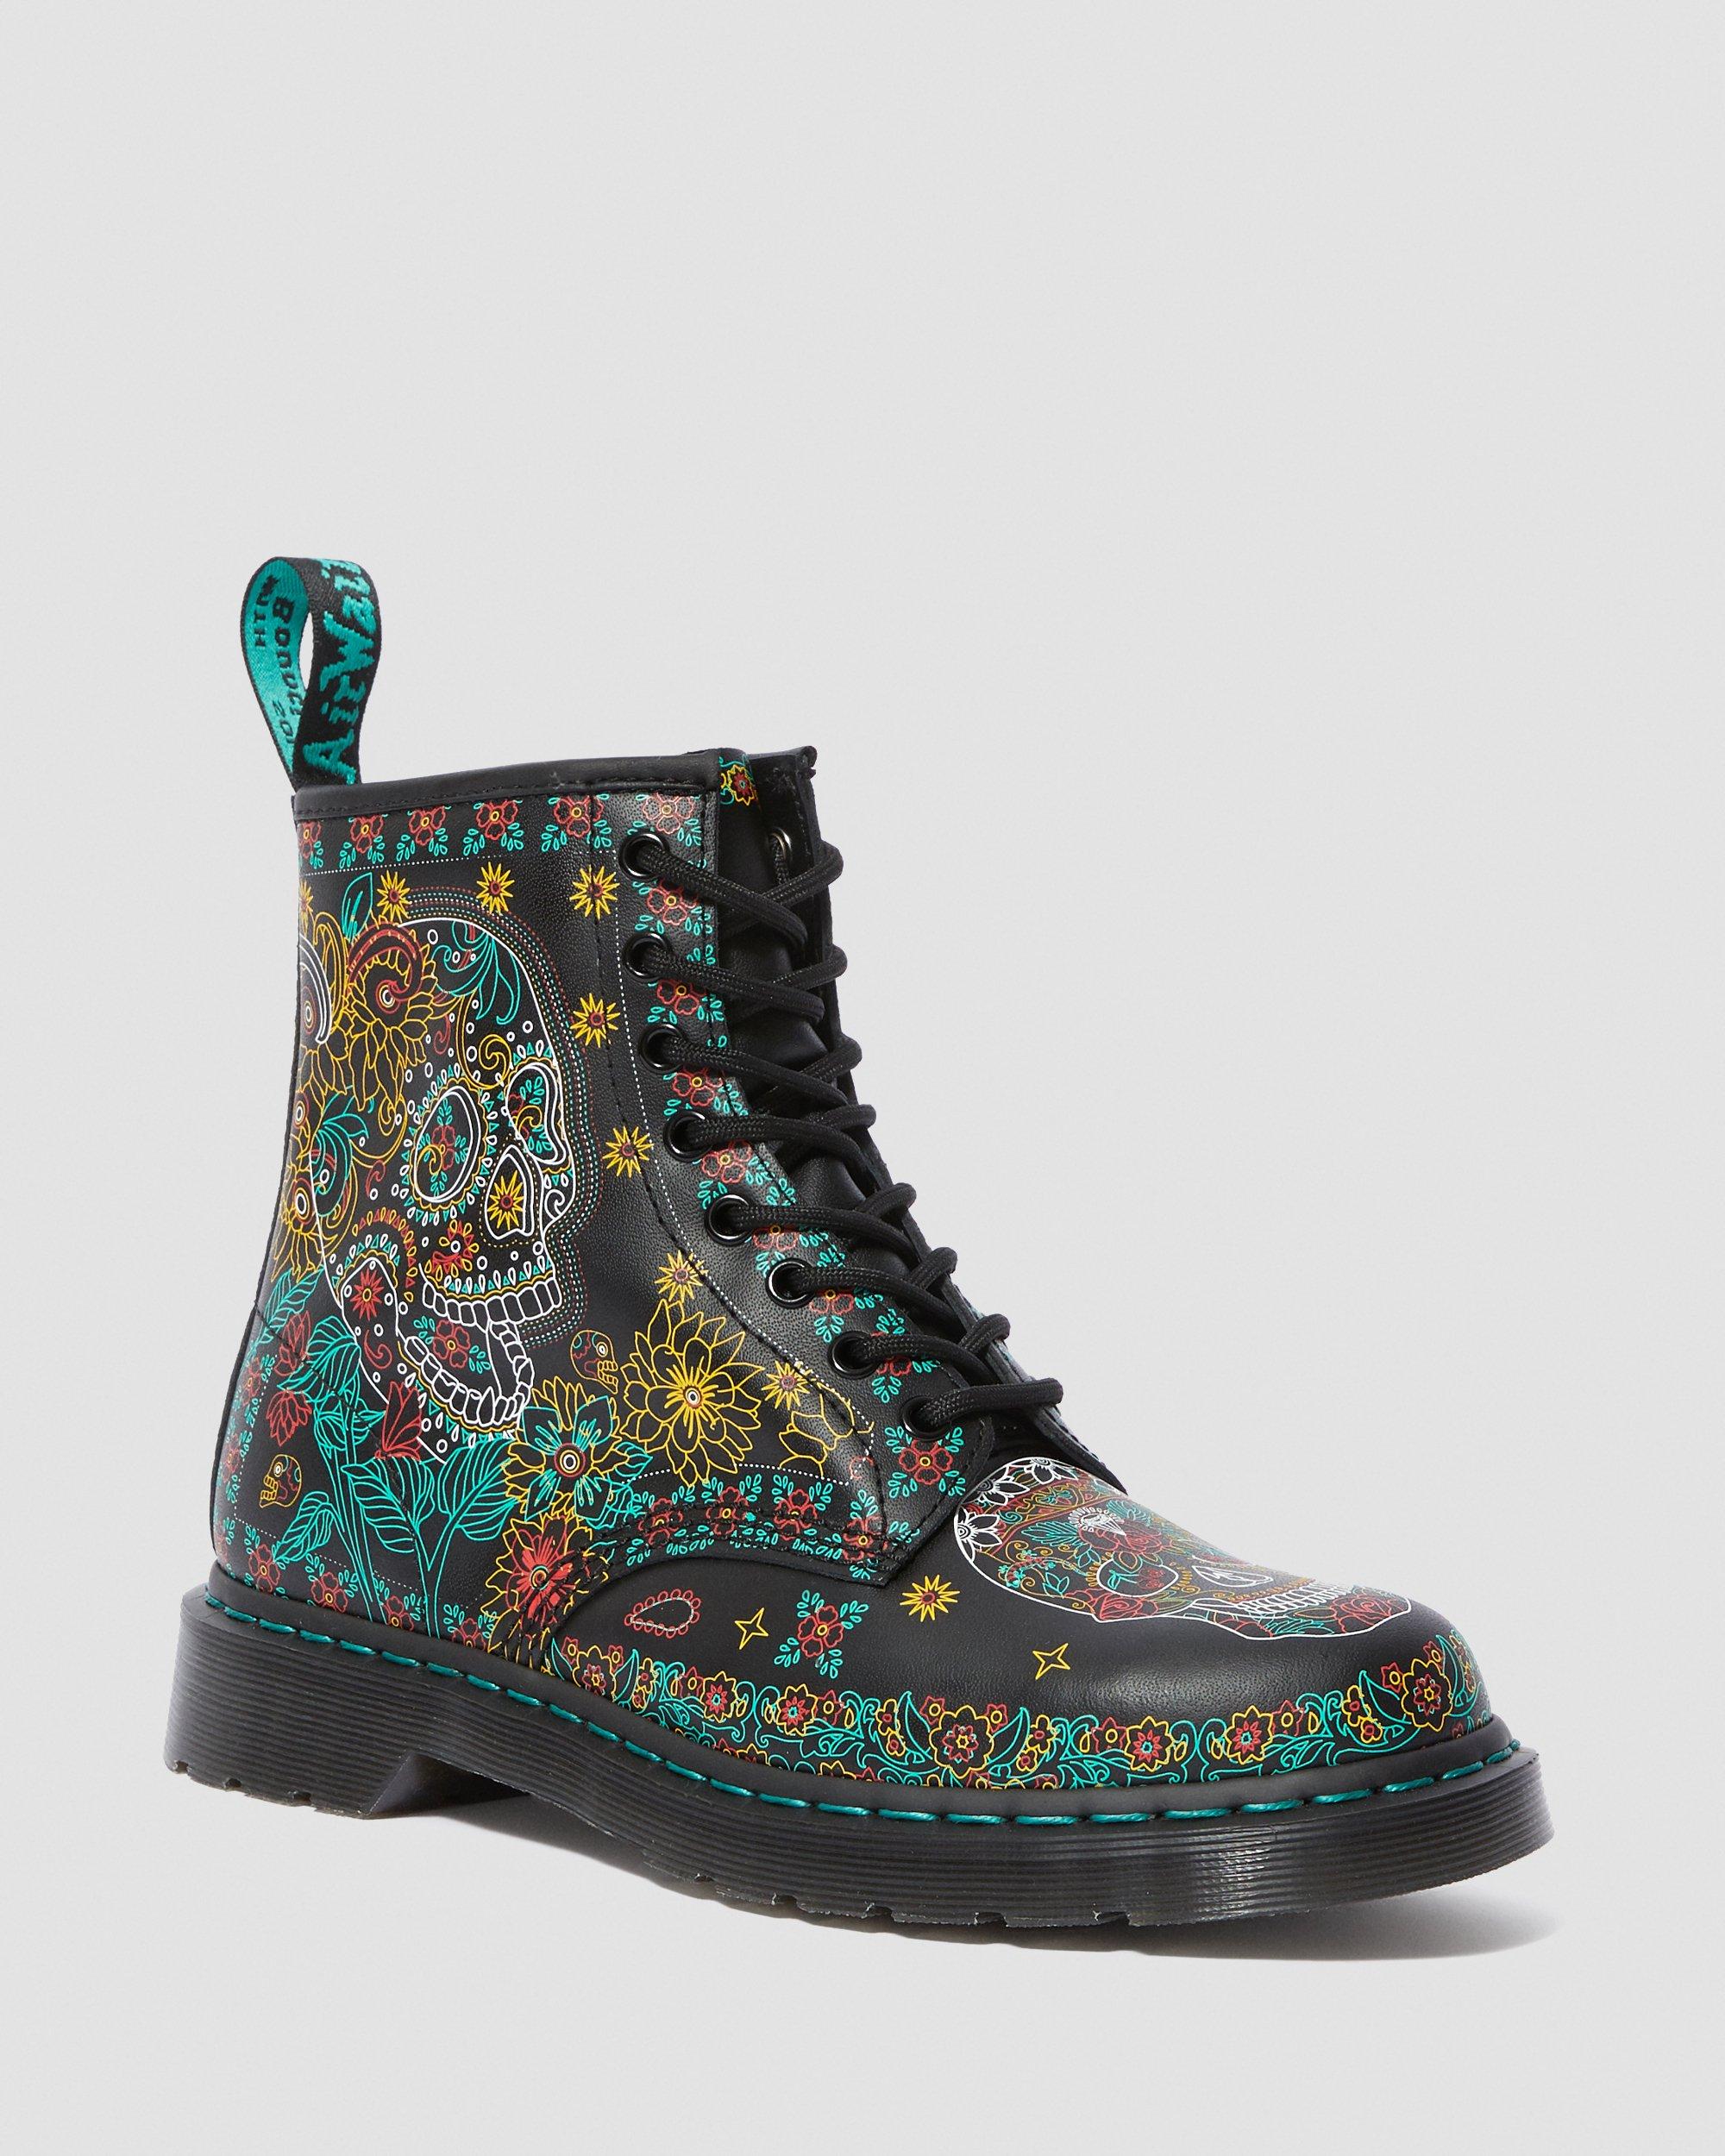 sugar skull boots for sale